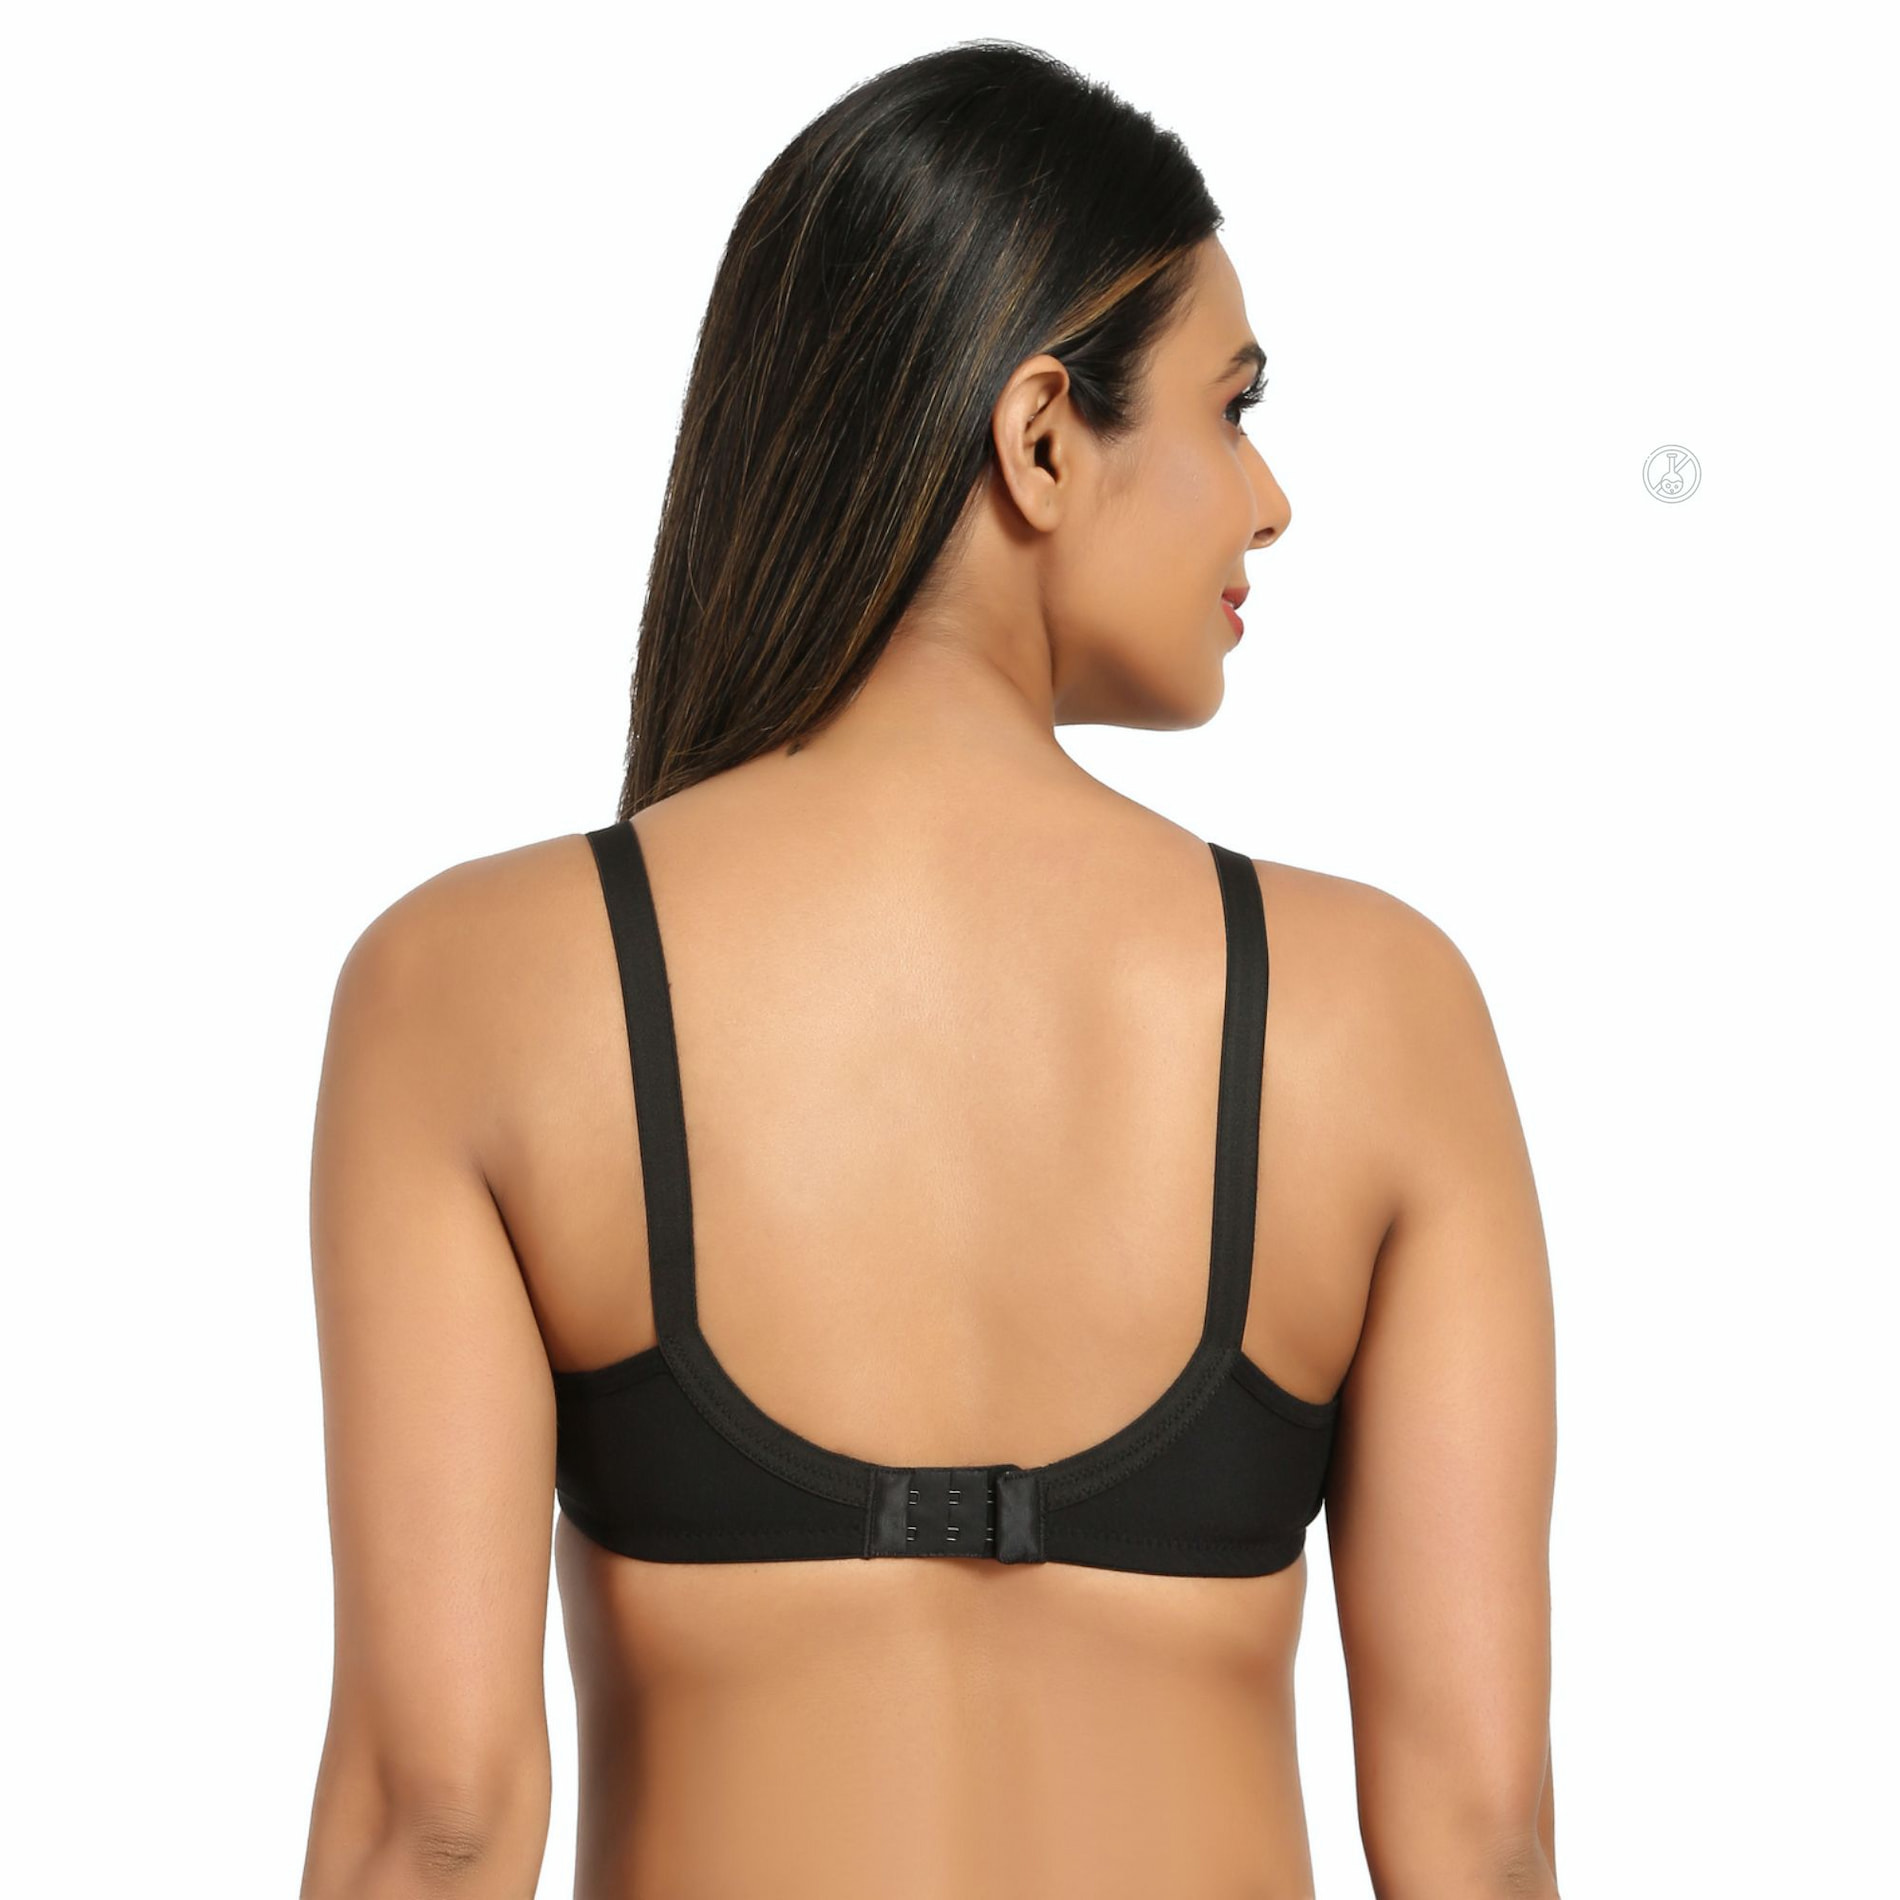 Maternity/Nursing Bras Non-Wired, Non-Padded with free Bra Extender - Classic Black 38 B 